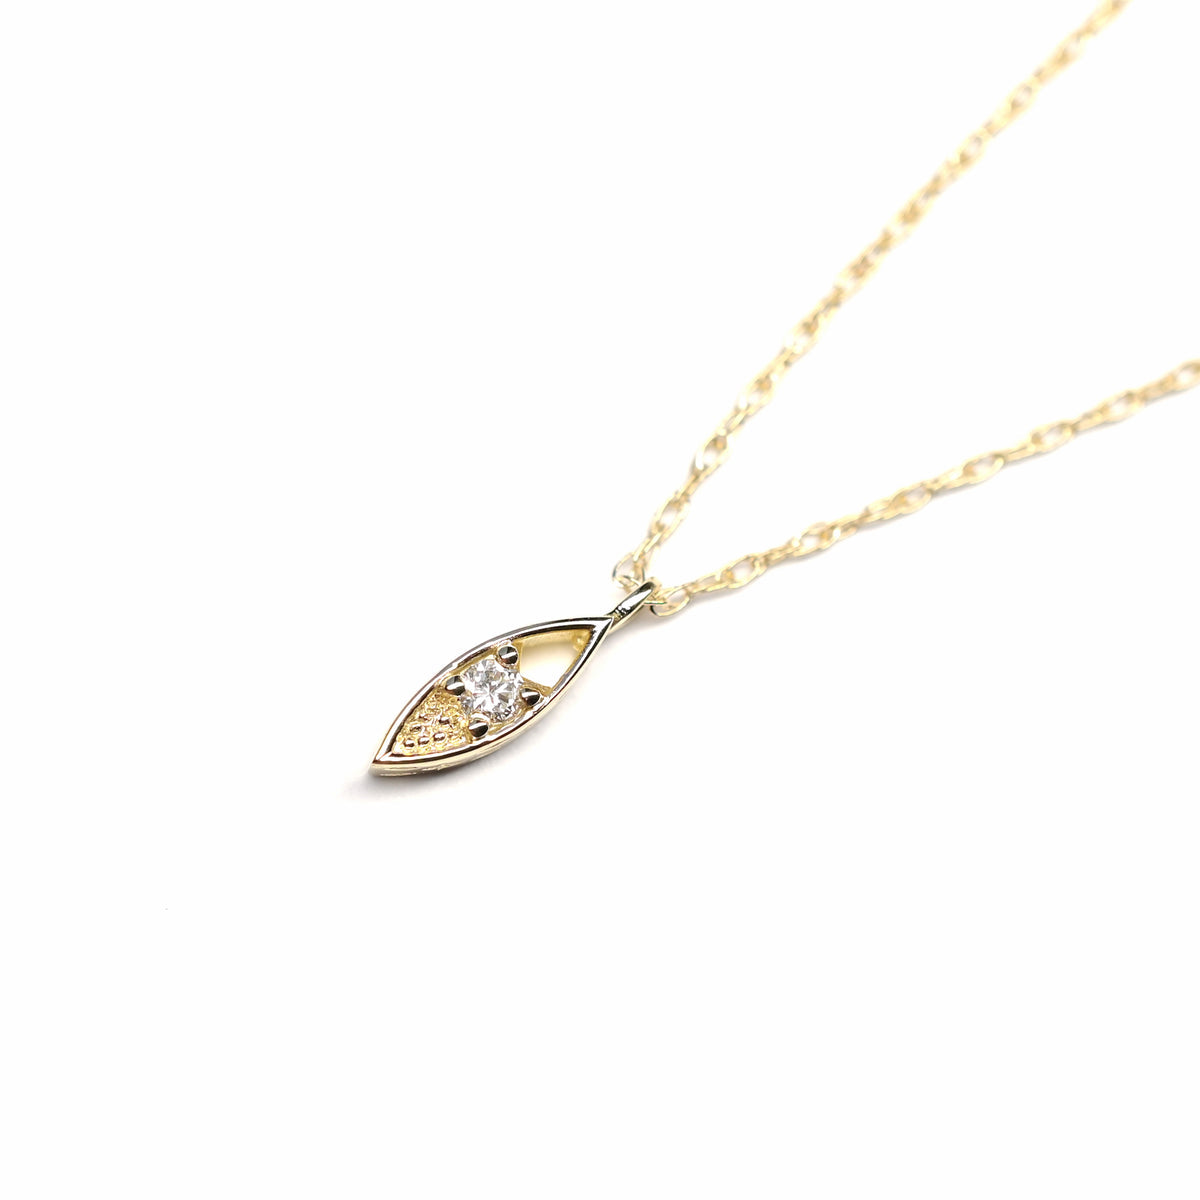 Solid 14k yellow gold pendant, chain, and clasp featuring a white diamond and a hand engraved star detail. Each Miarante piece is carefully handcrafted in Chicago by a skilled production team.